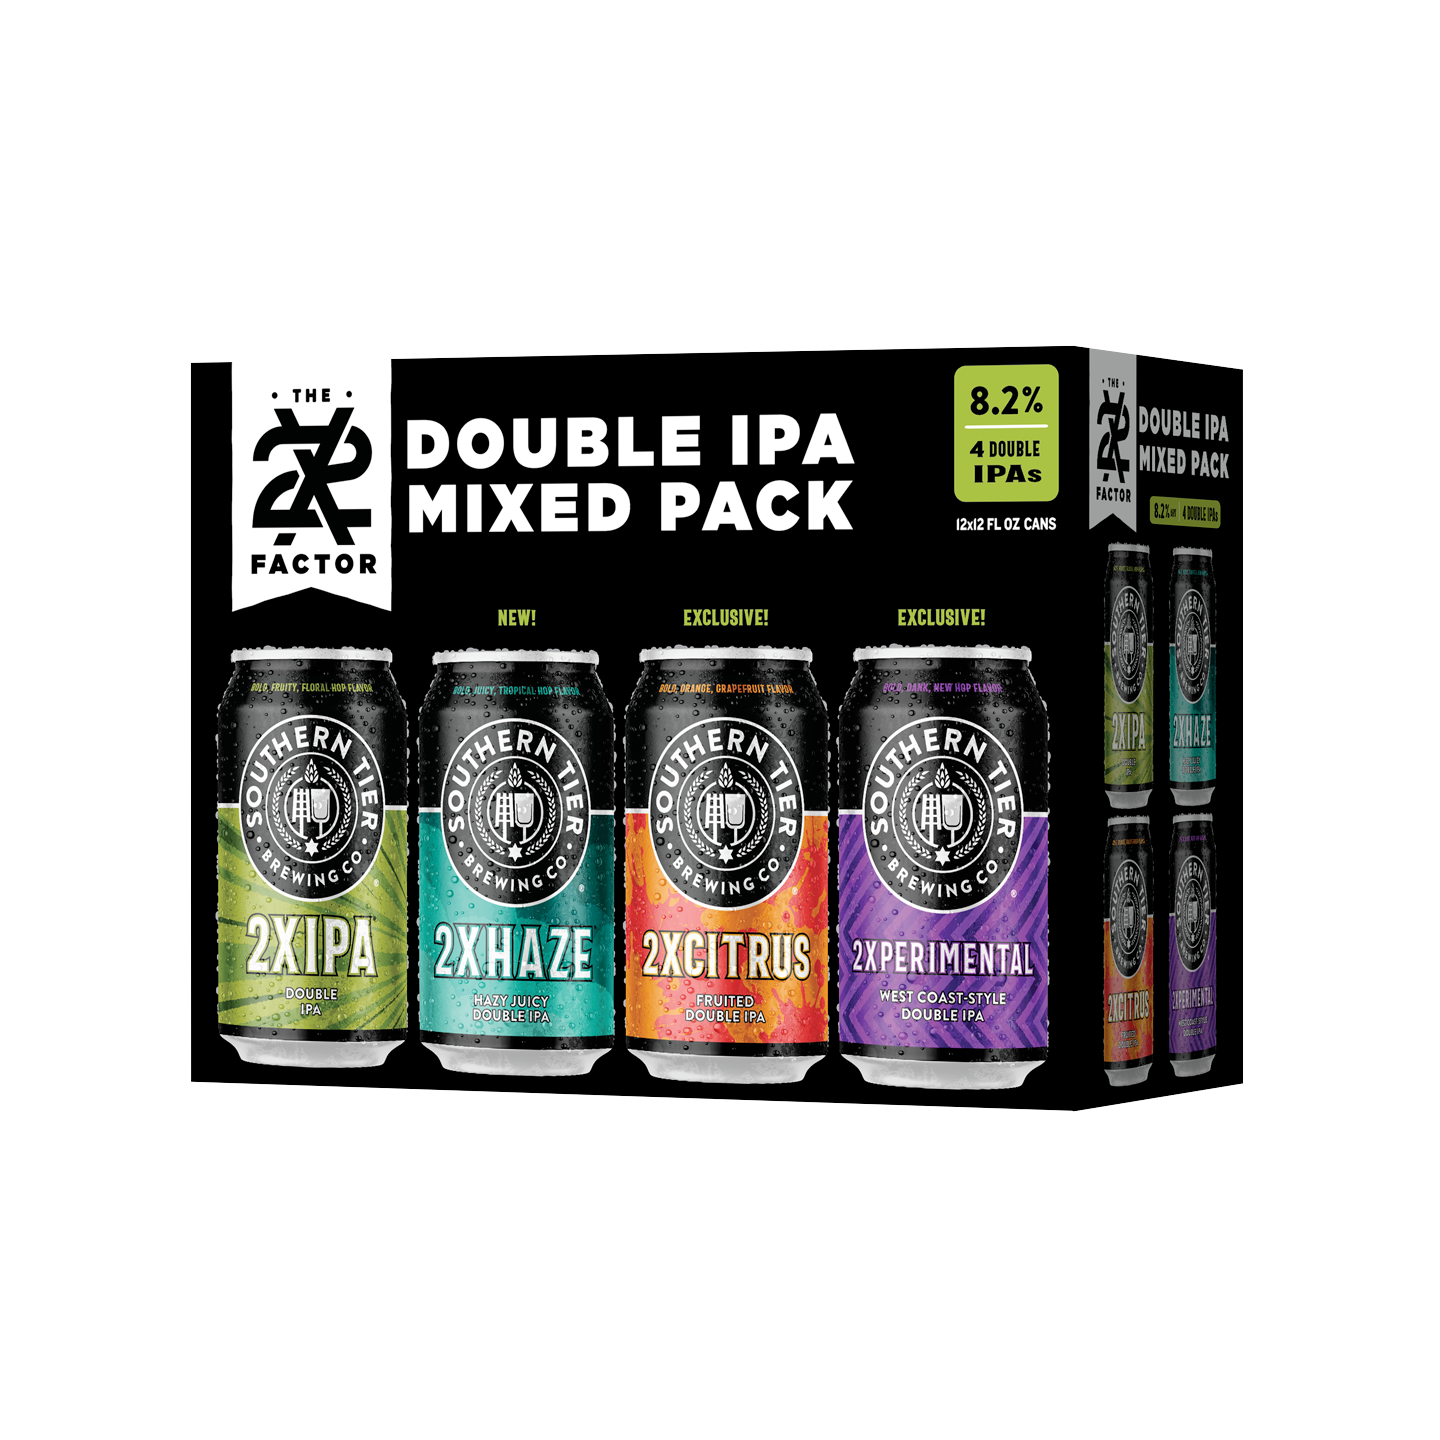 2X FACTOR DOUBLE IPA MIXED PACK